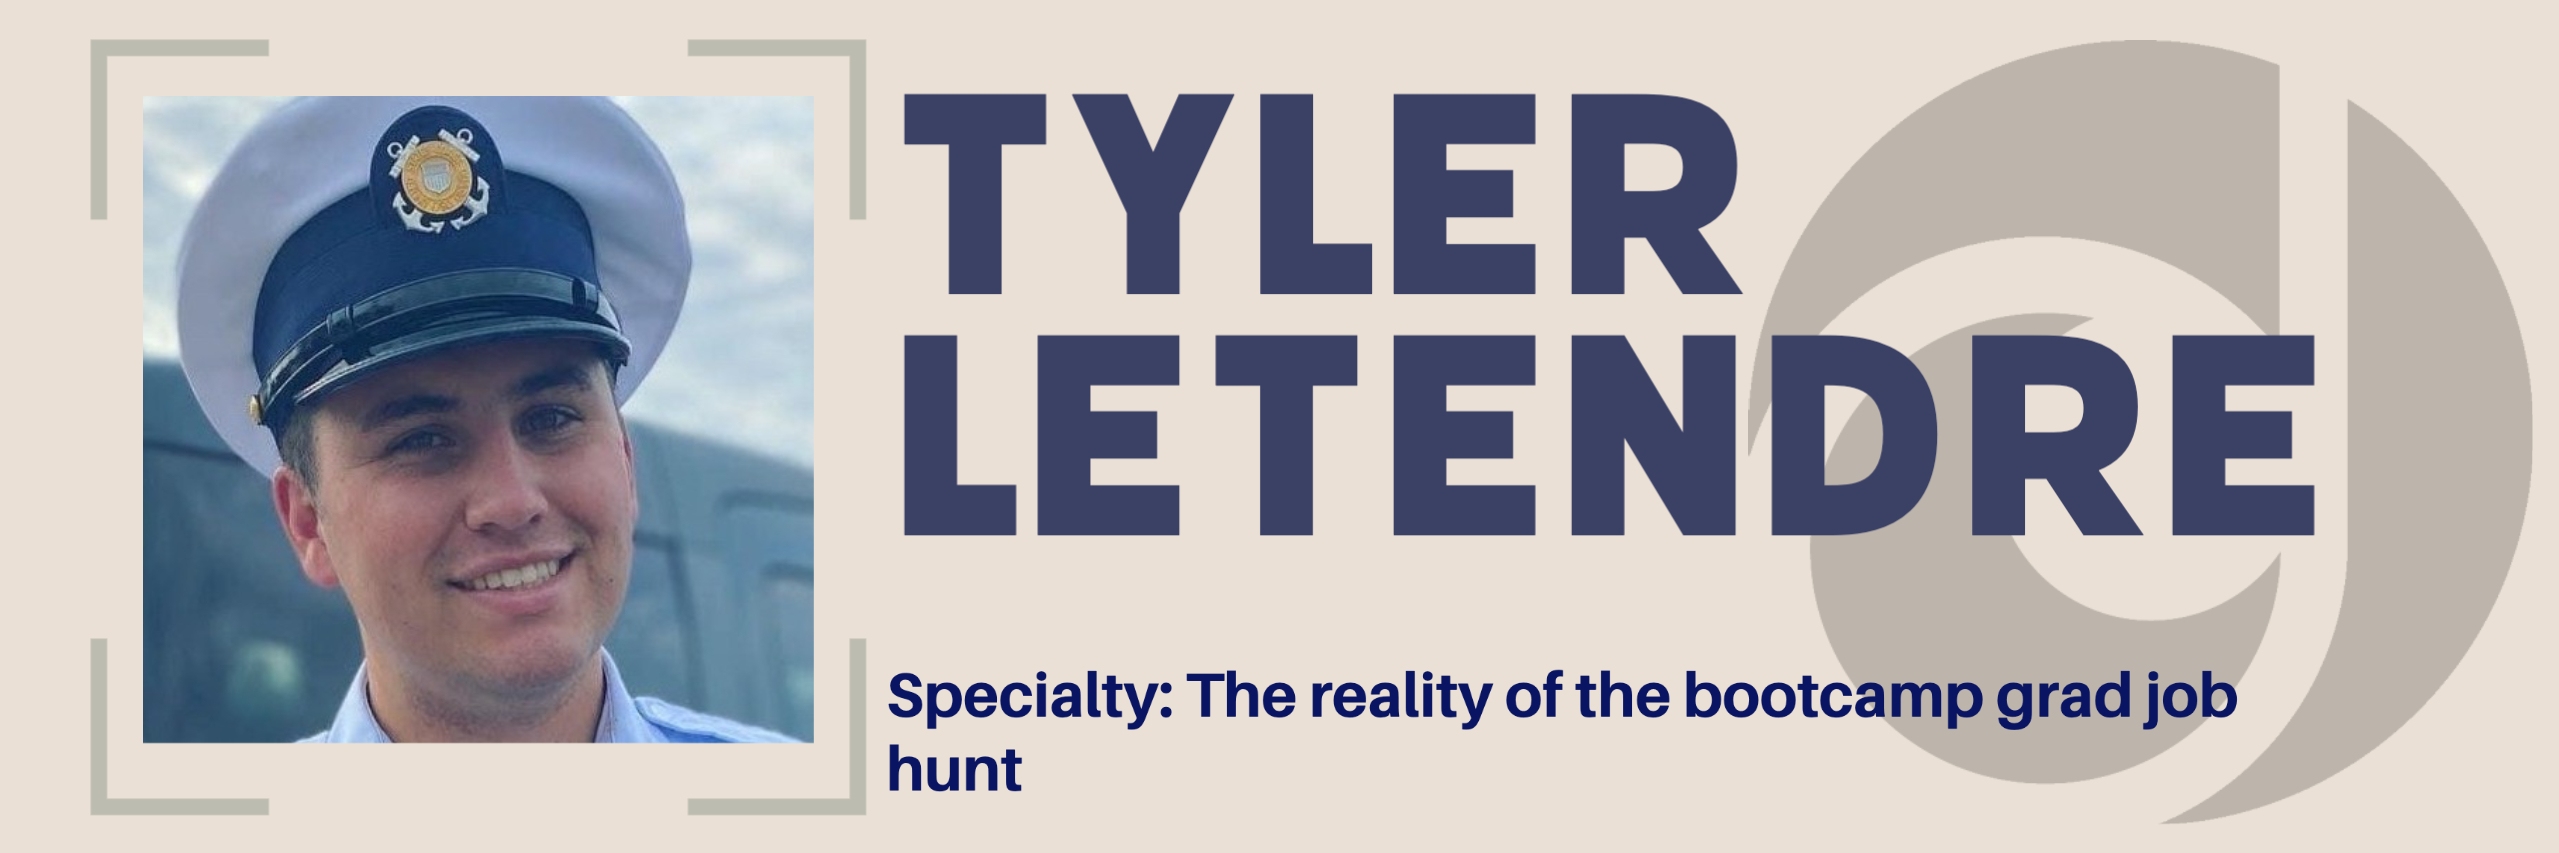 Tyler Letendre shares his wisdom into the job hunt after graduating the online coding bootcamp